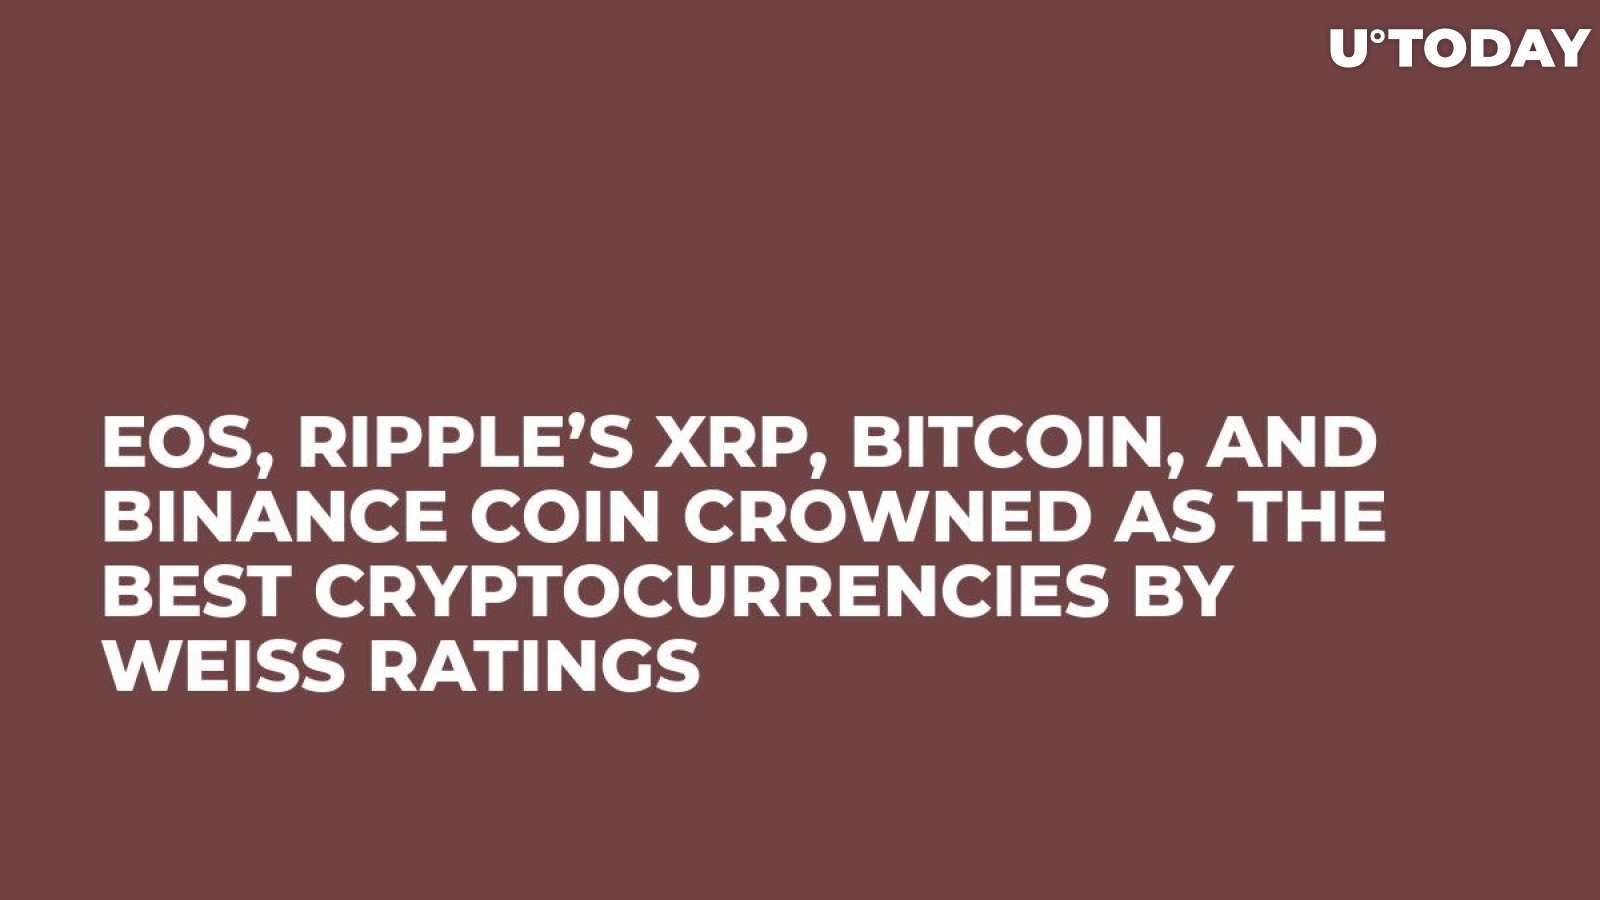 EOS, Ripple’s XRP, Bitcoin, and Binance Coin Crowned as the Best Cryptocurrencies by Weiss Ratings 